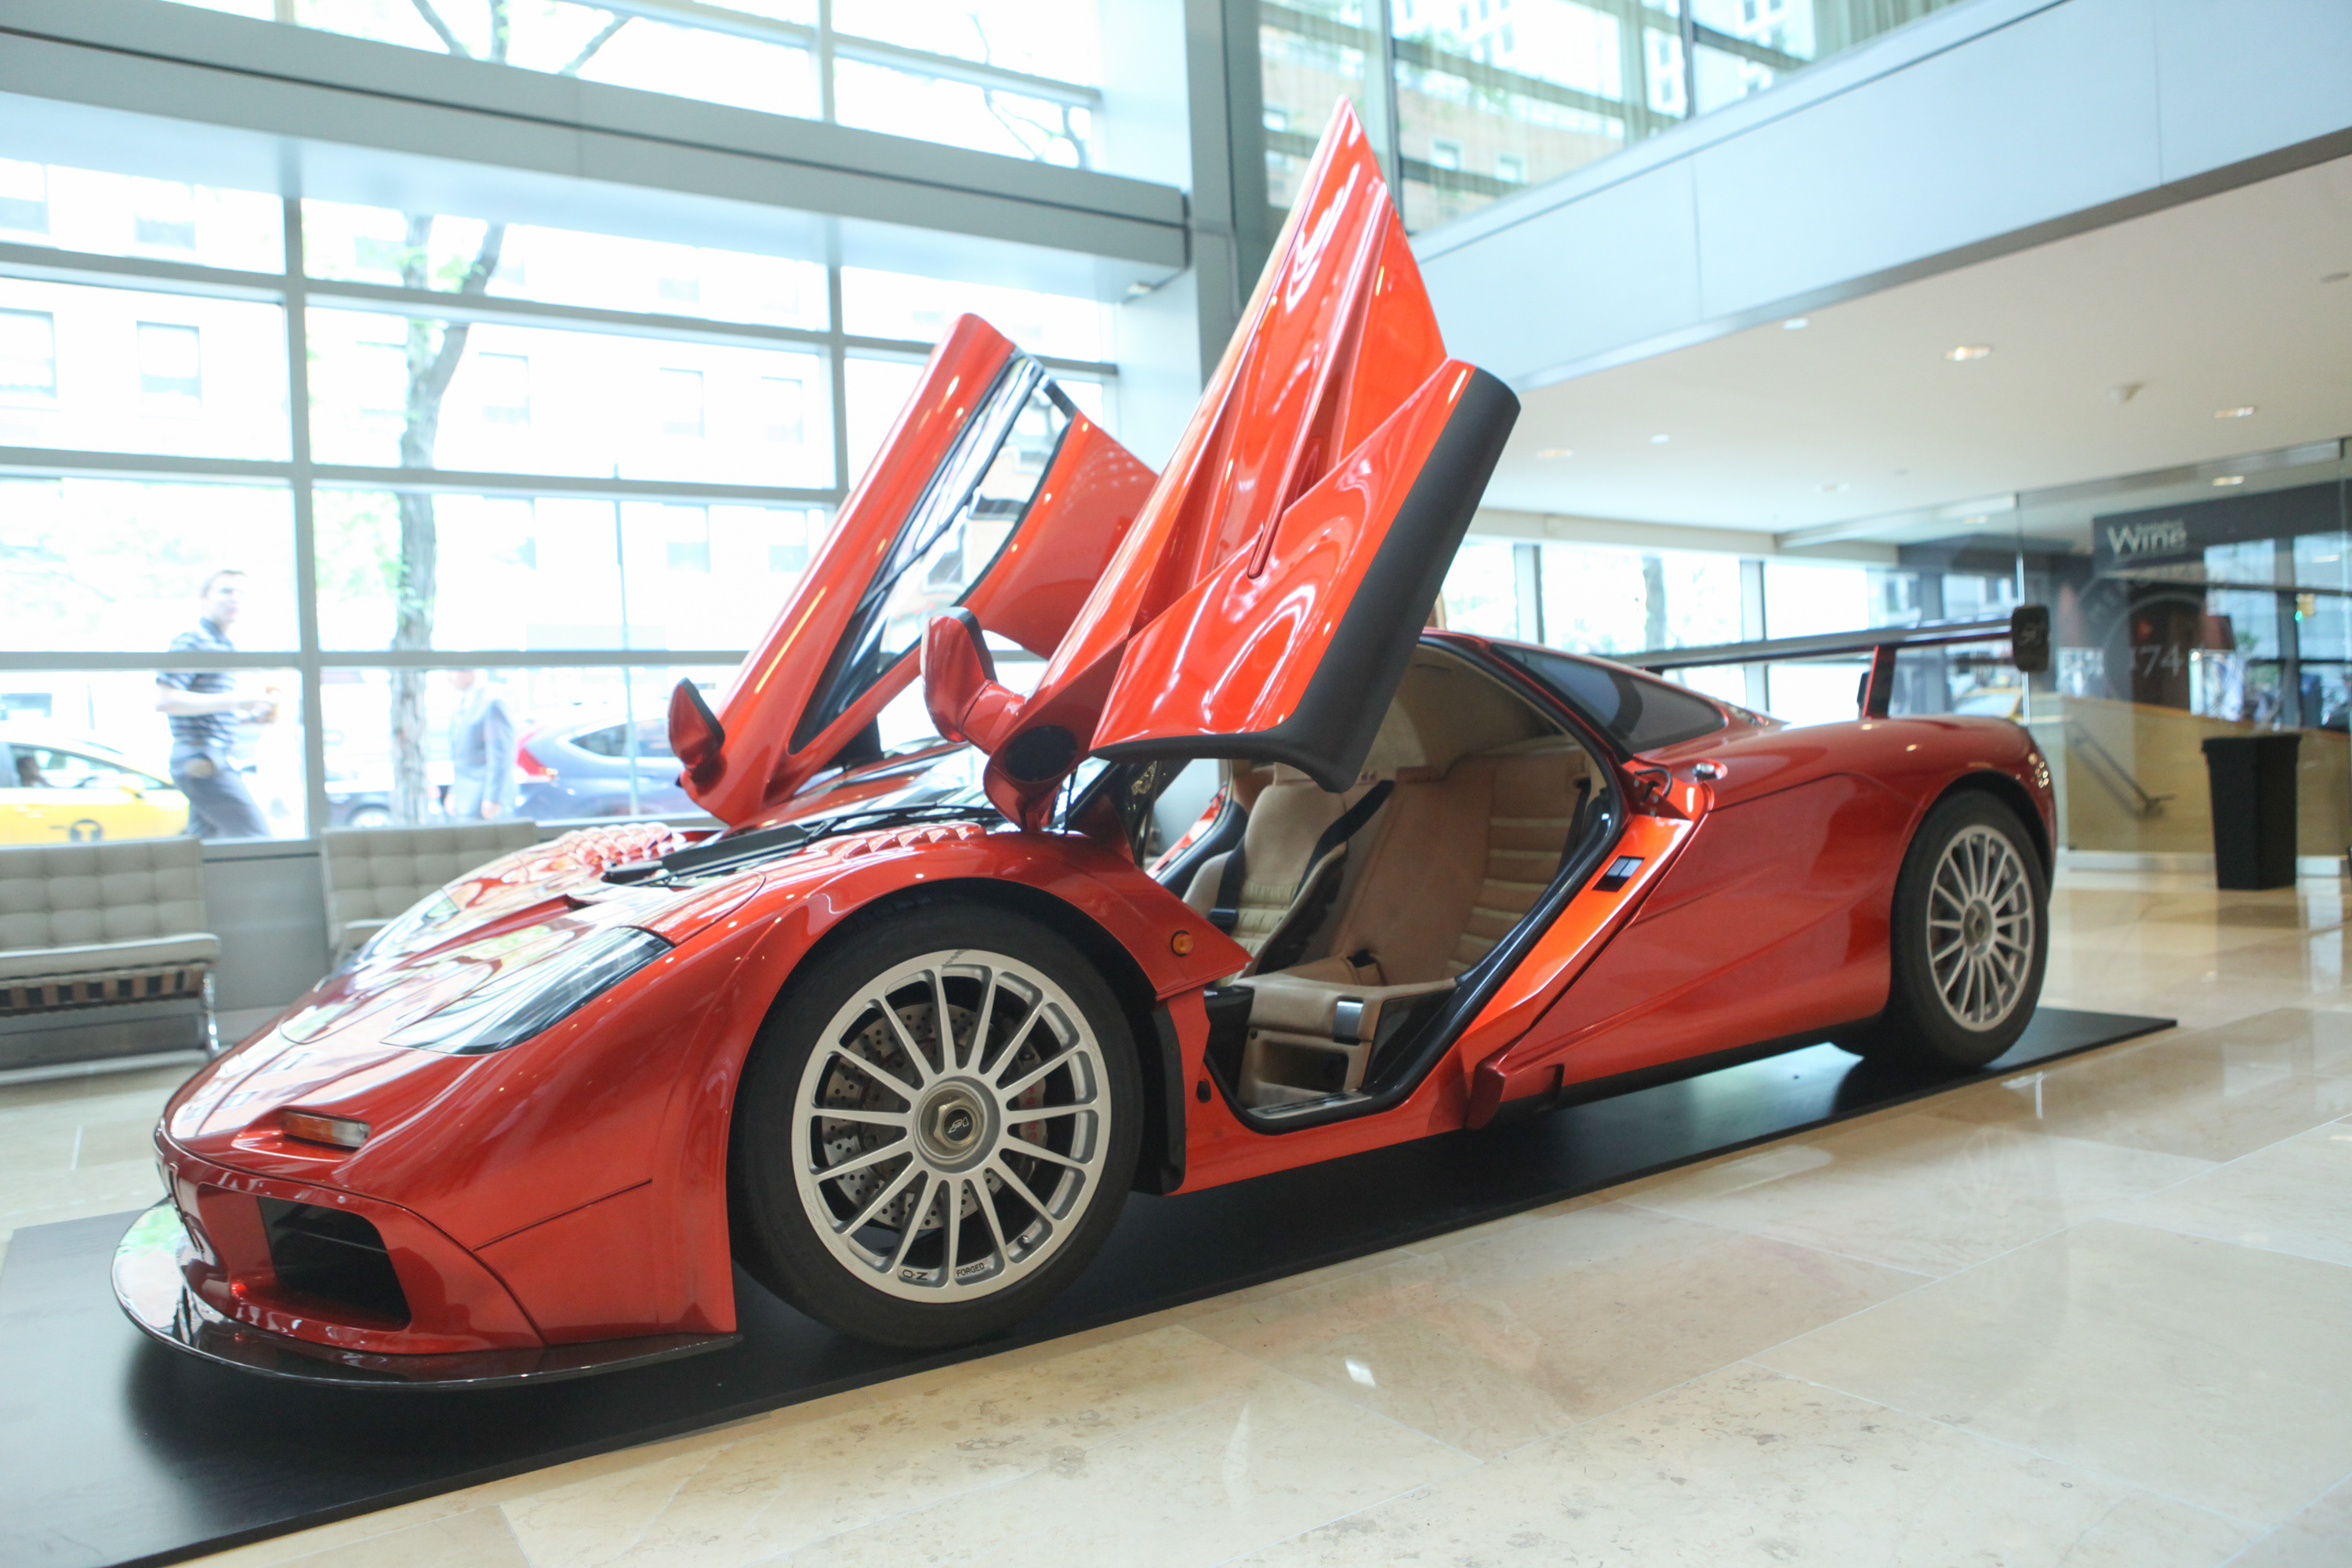 General view of the 1998 McLaren F1 "LM-Specification supercar during McLaren's F1 New York media preview at Sotheby's on June 3, 2015 in New York City. (Steve Zak Photography&mdash;FilmMagic)